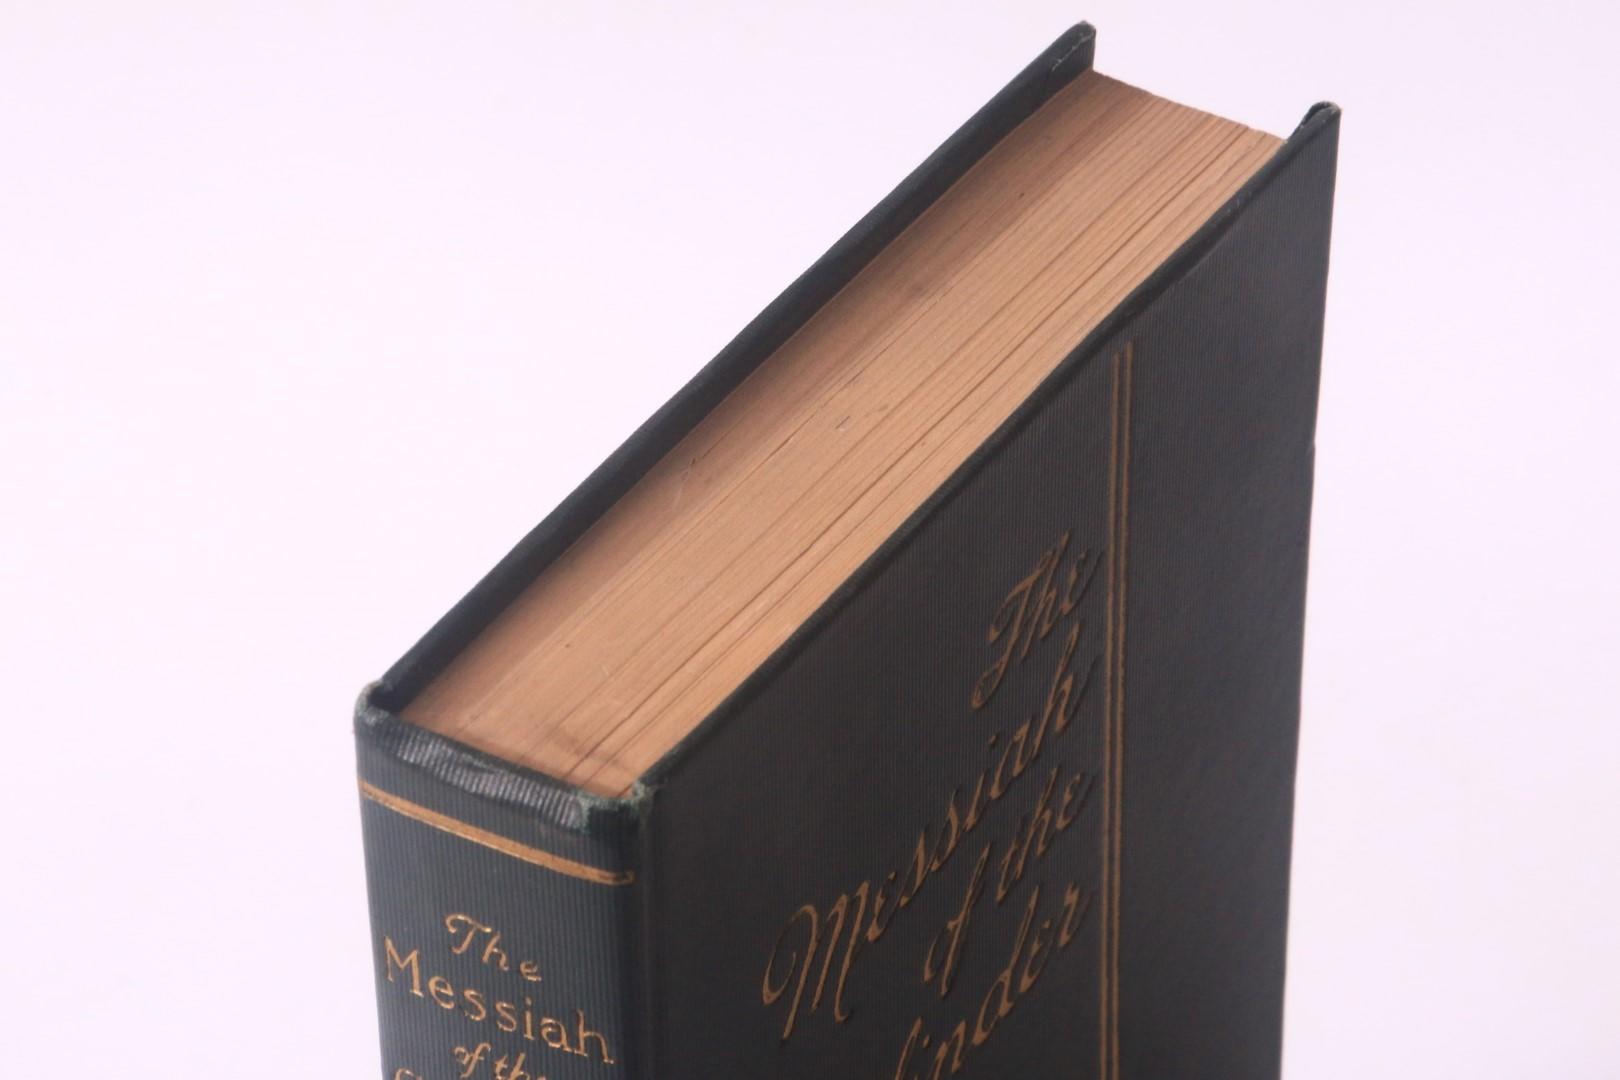 Victor Rousseau - The Messiah of the Cylinder - A.C. McClurg, 1917, First Edition.